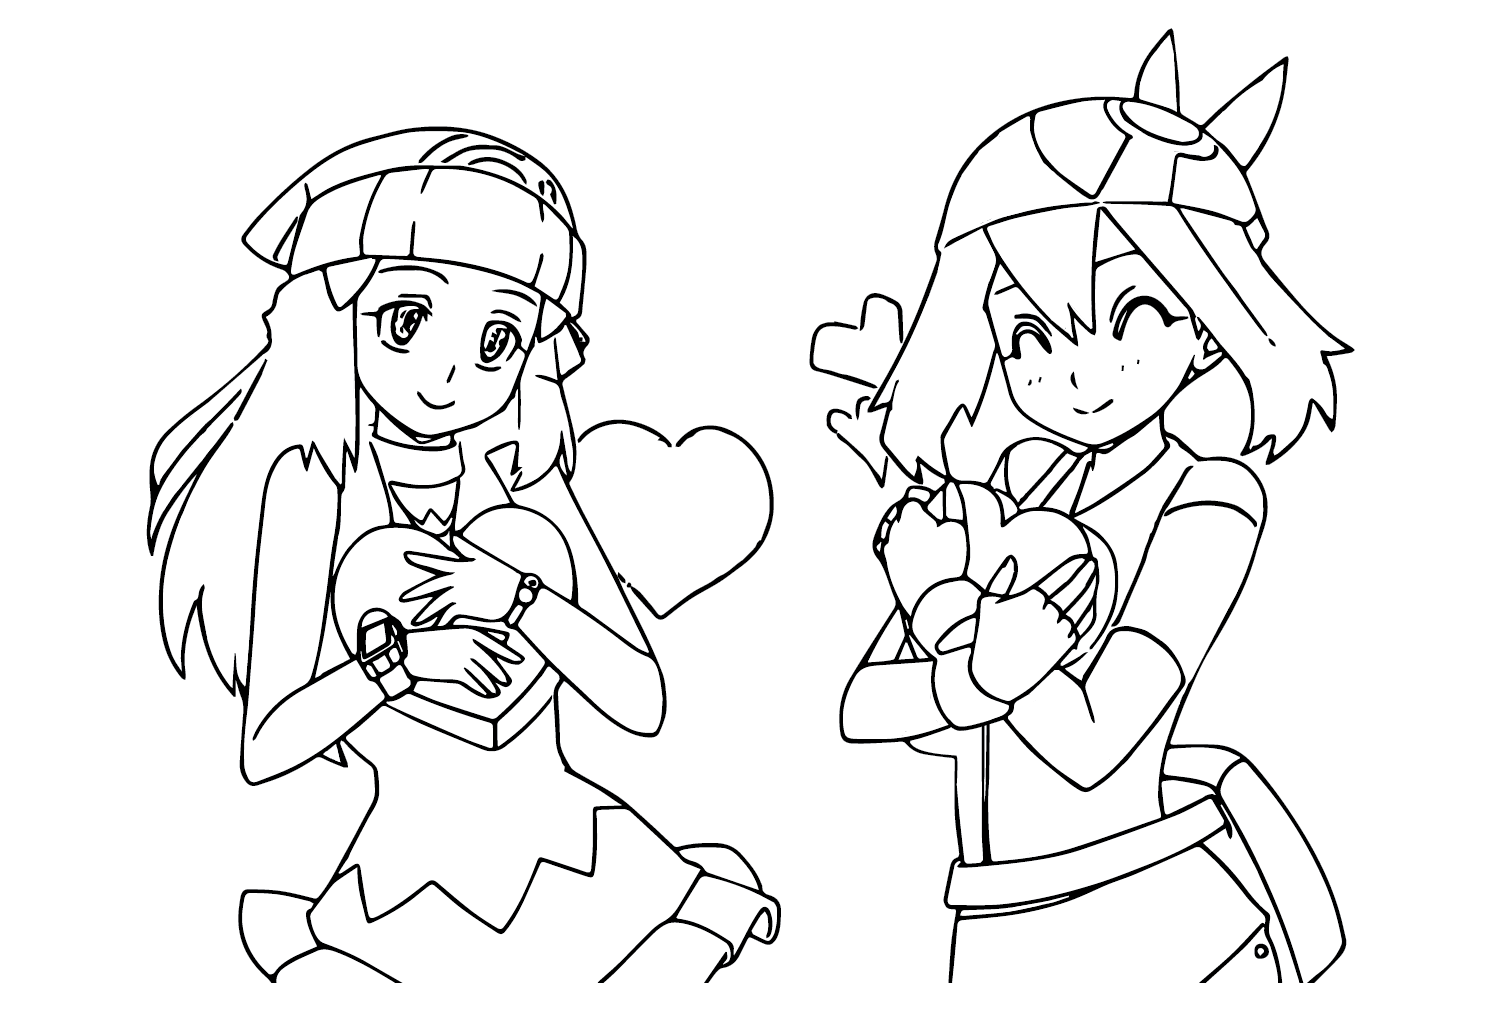 Pokemon Dawn and May Coloring Page from May Pokemon